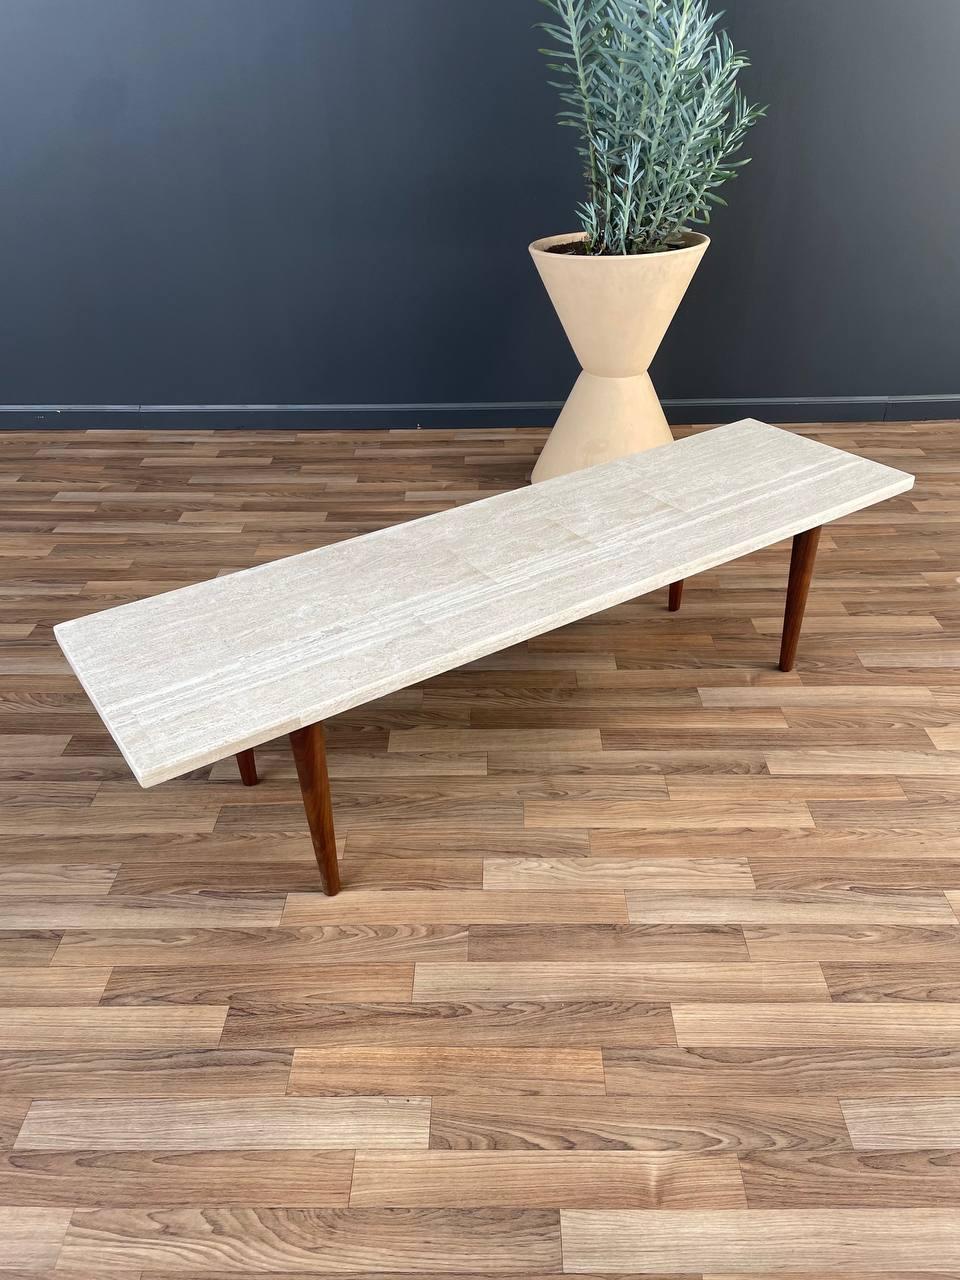 Condition:
Newly Refinished Wood, Original Travertine Top

With over 15 years of experience, our workshop has followed a careful process of restoration, showcasing our passion and creativity for vintage designs that can seamlessly be incorporated